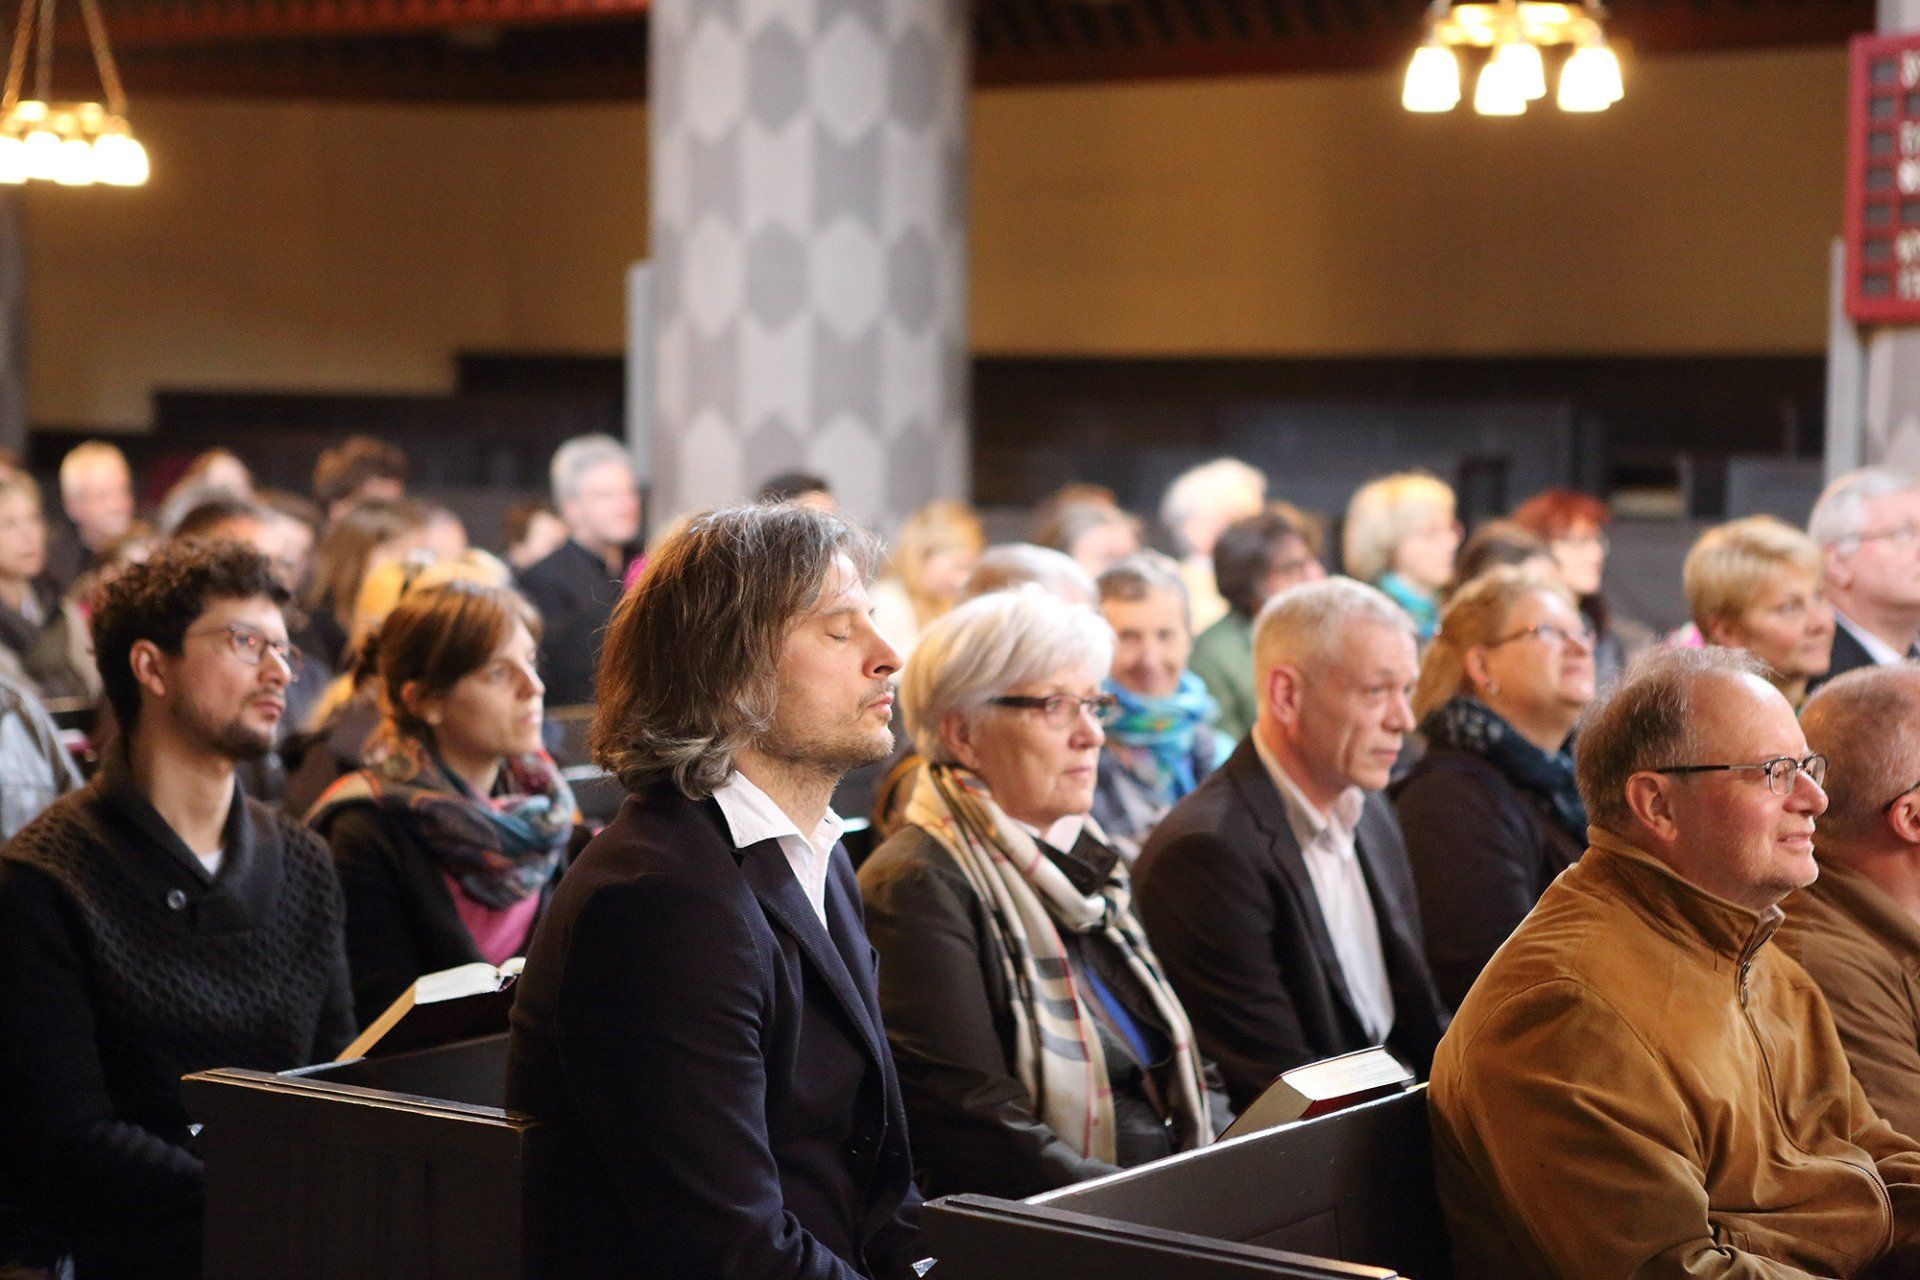 Sebastian Bieniek went from the back to front row, during the mass that took place in the University Church of Marburg in 2016 and asked everyone 